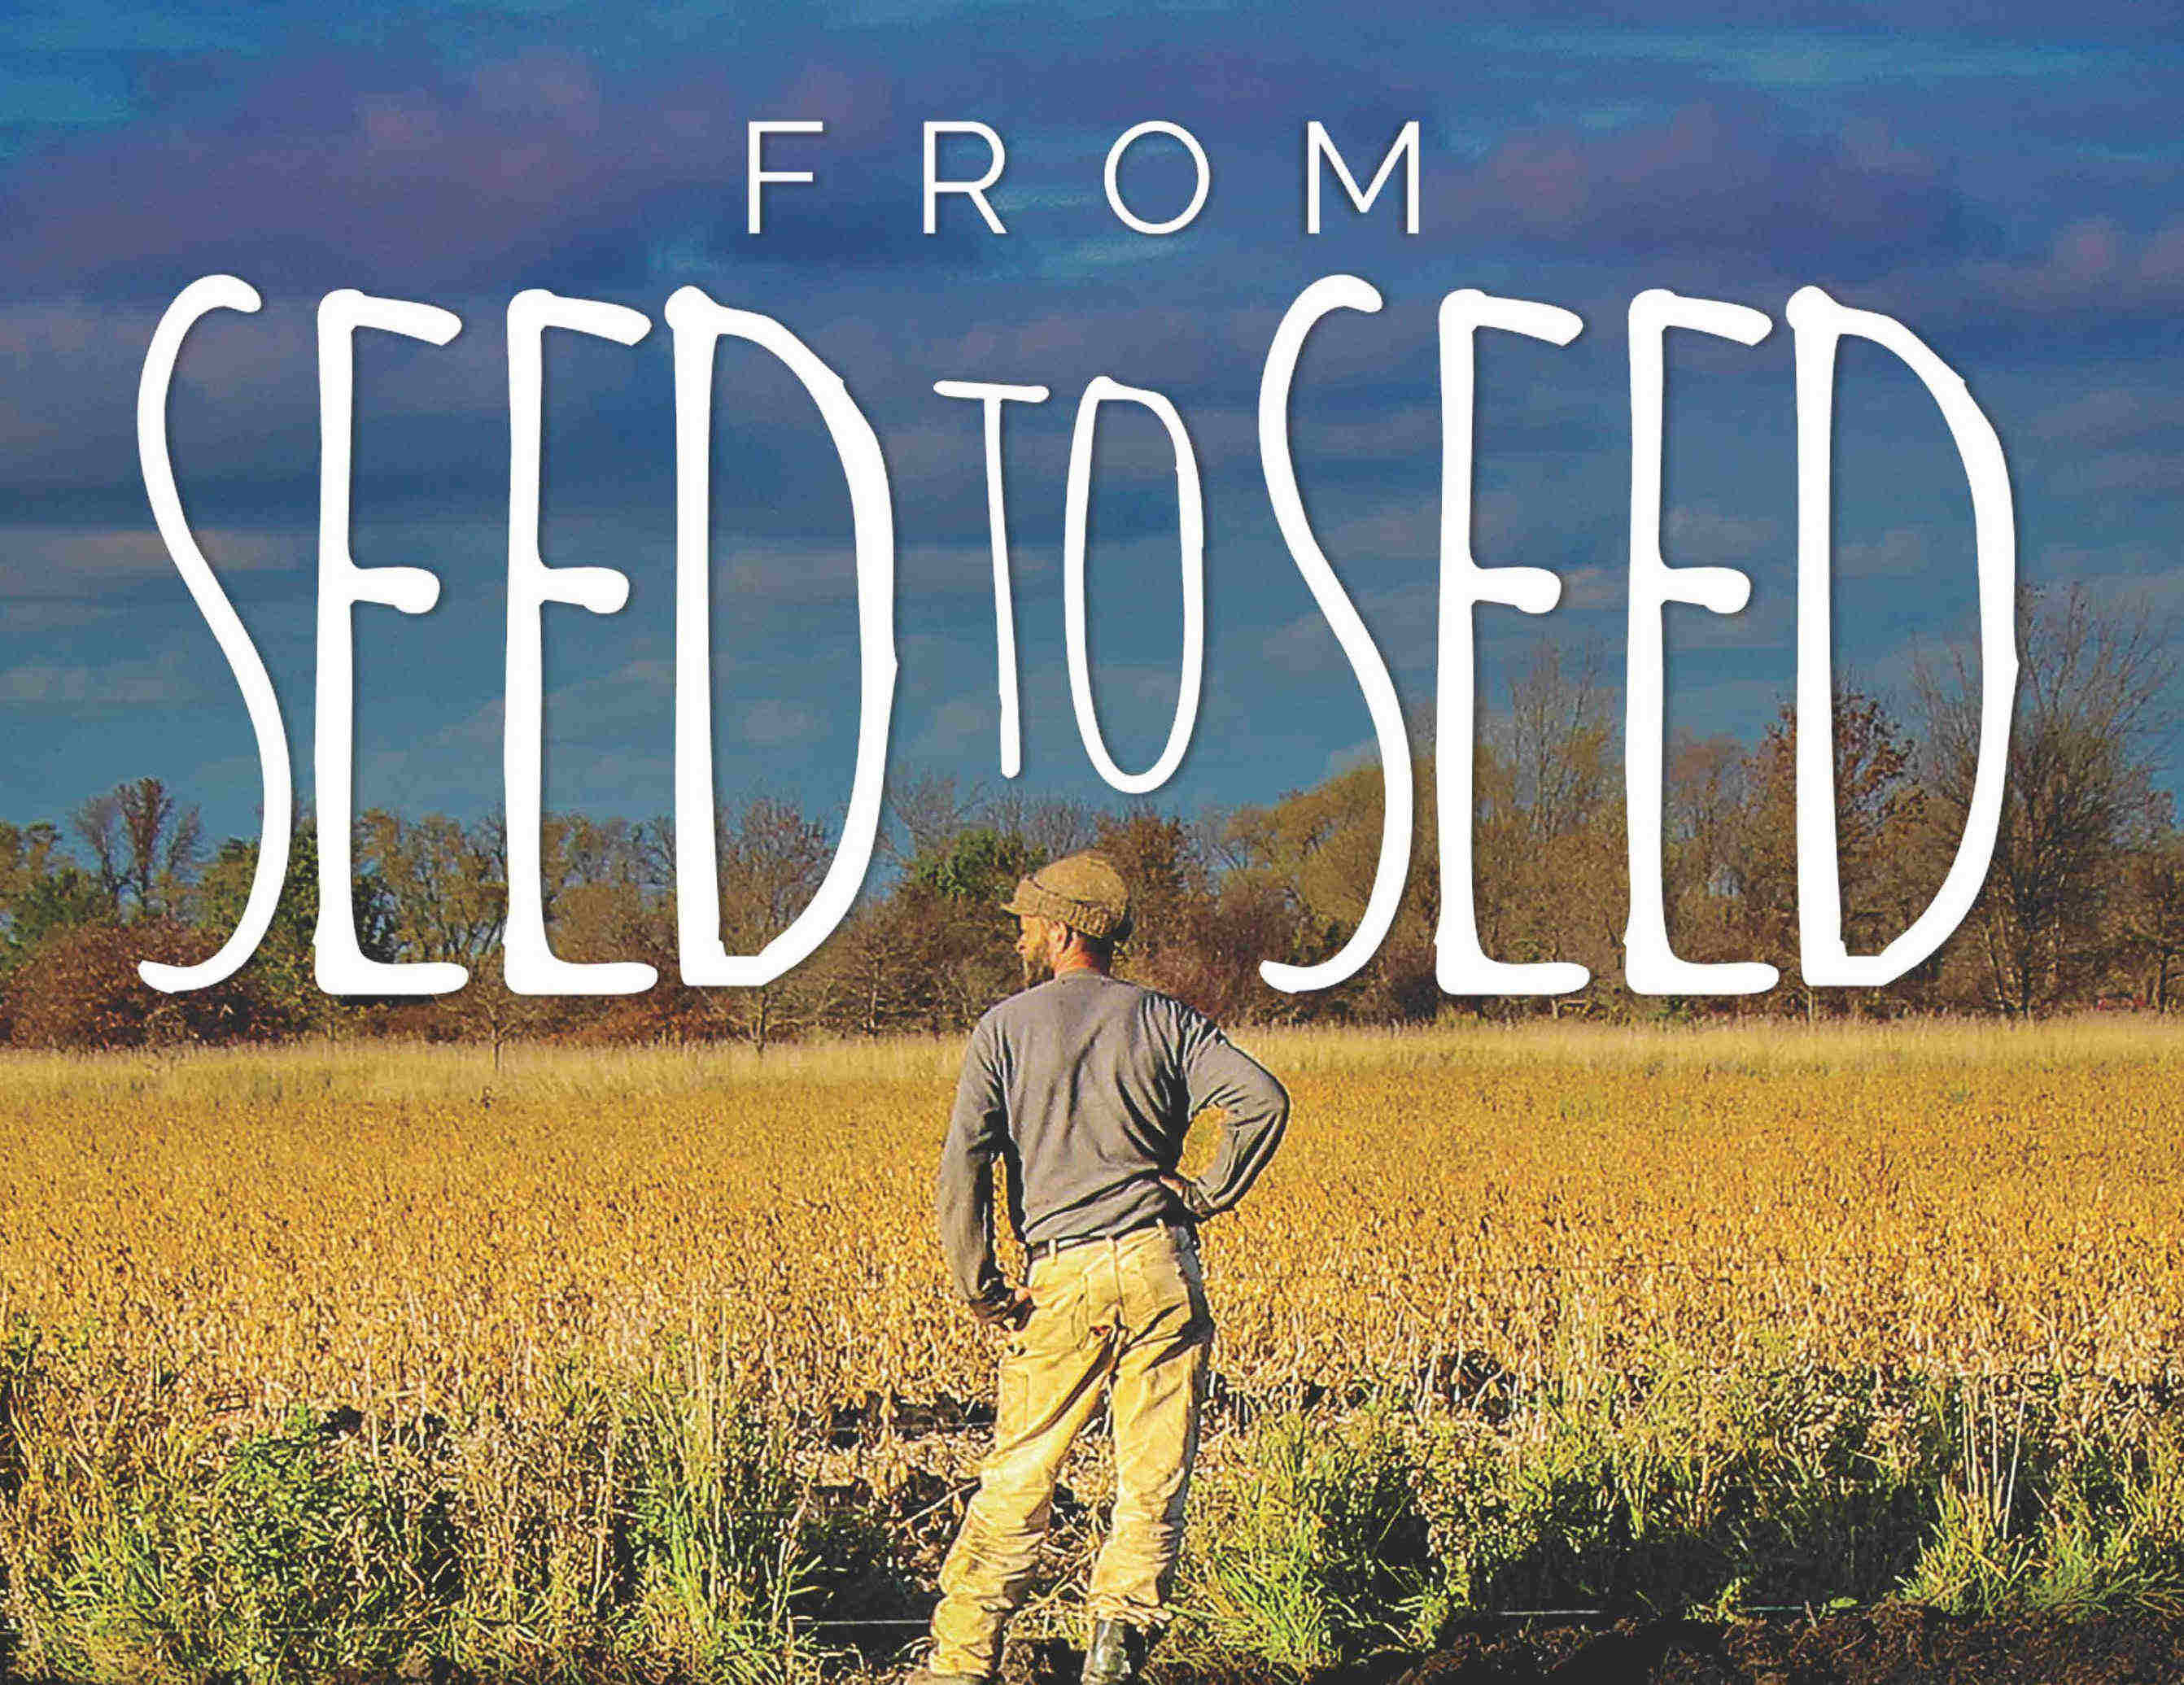 From Seed to Seed poster